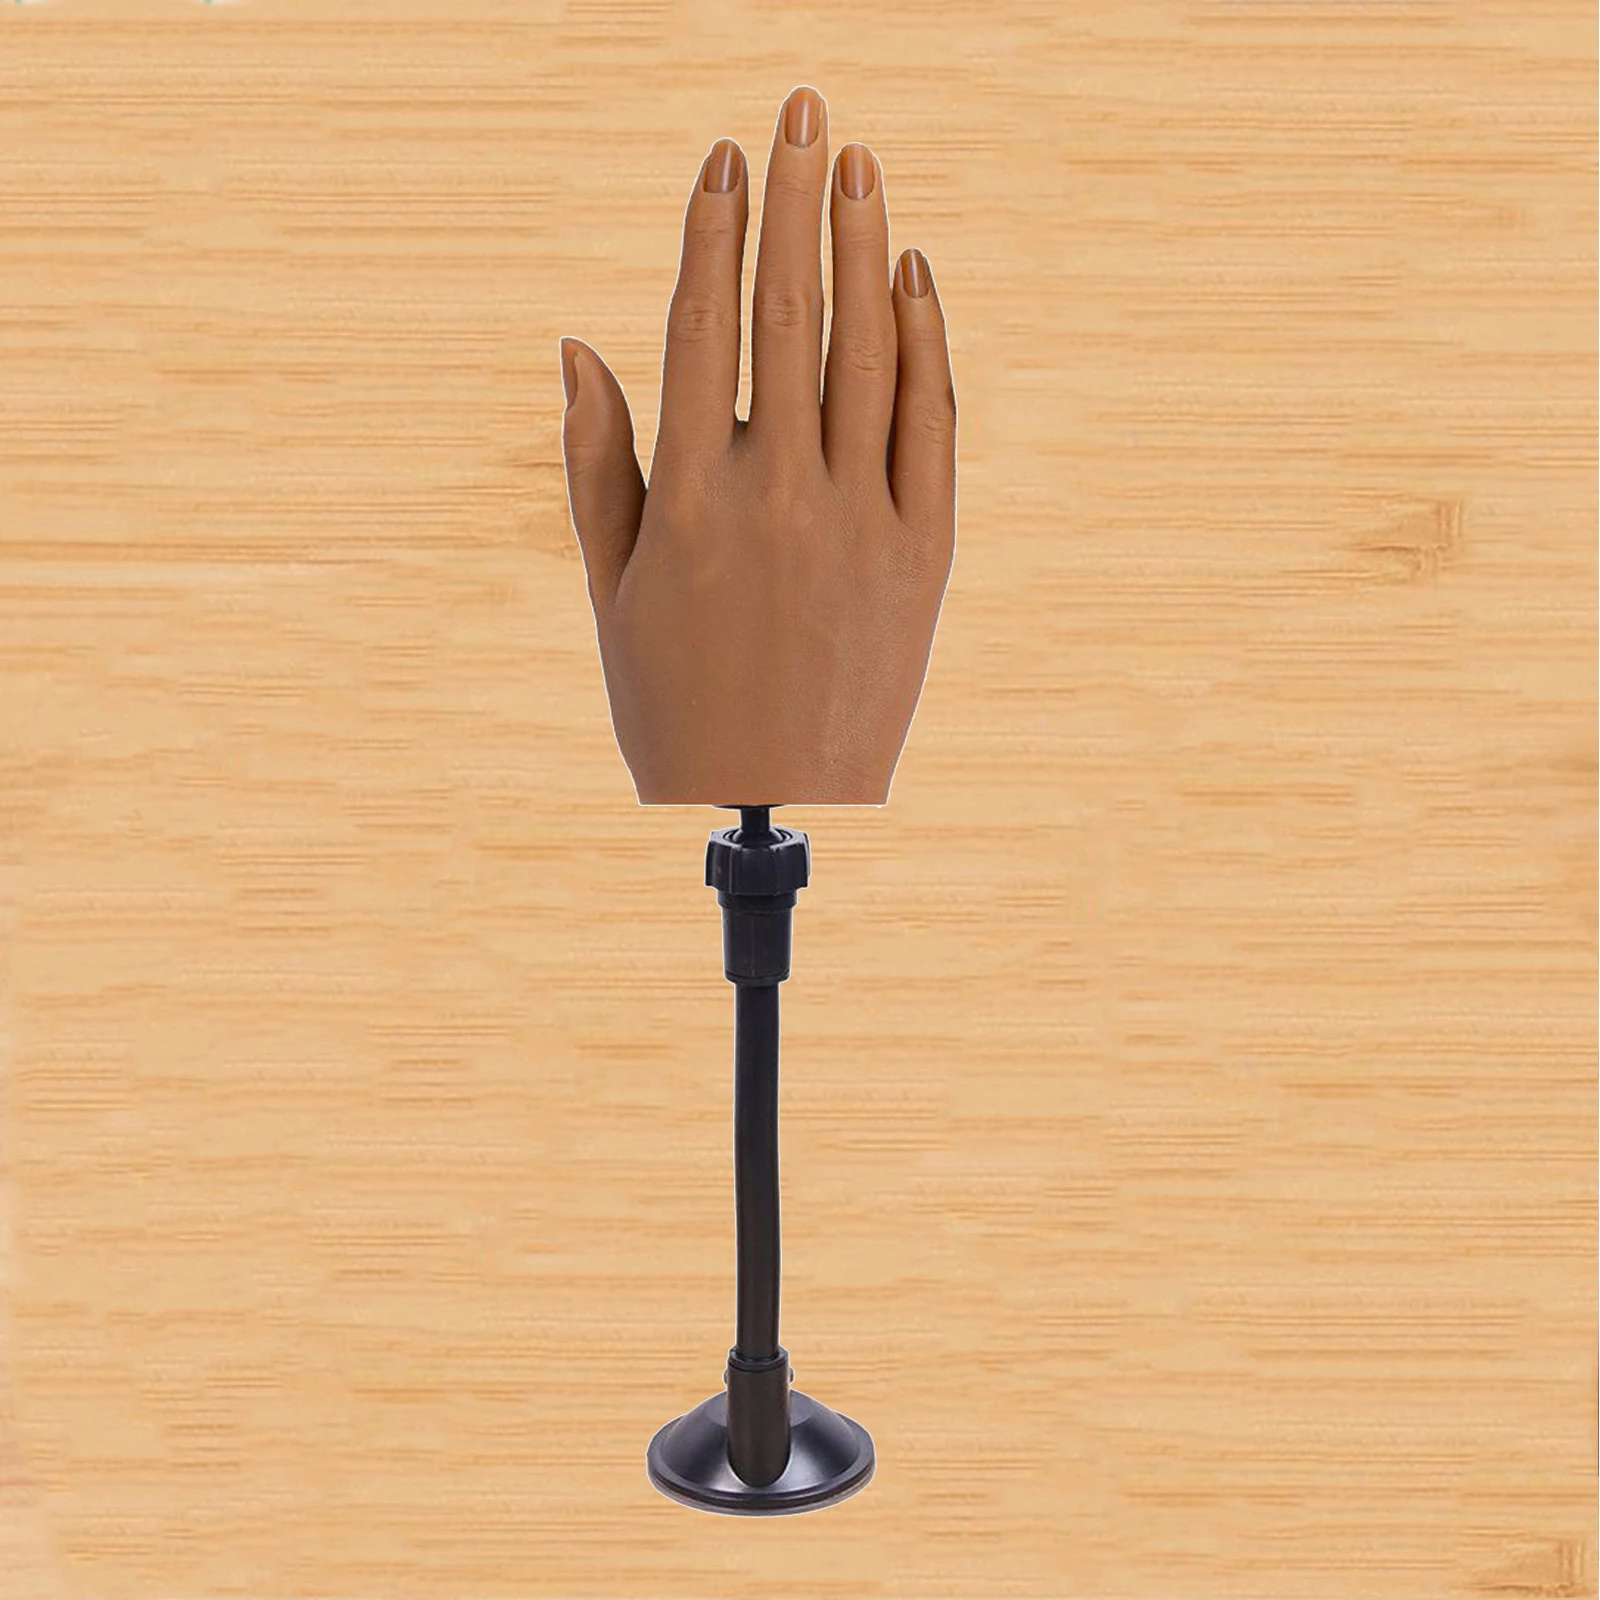 Silicone Practice Hand for Acrylic Nails Nail Art Training Hand Flexible Movable Finger Fake Hand Manicure Practice Tool